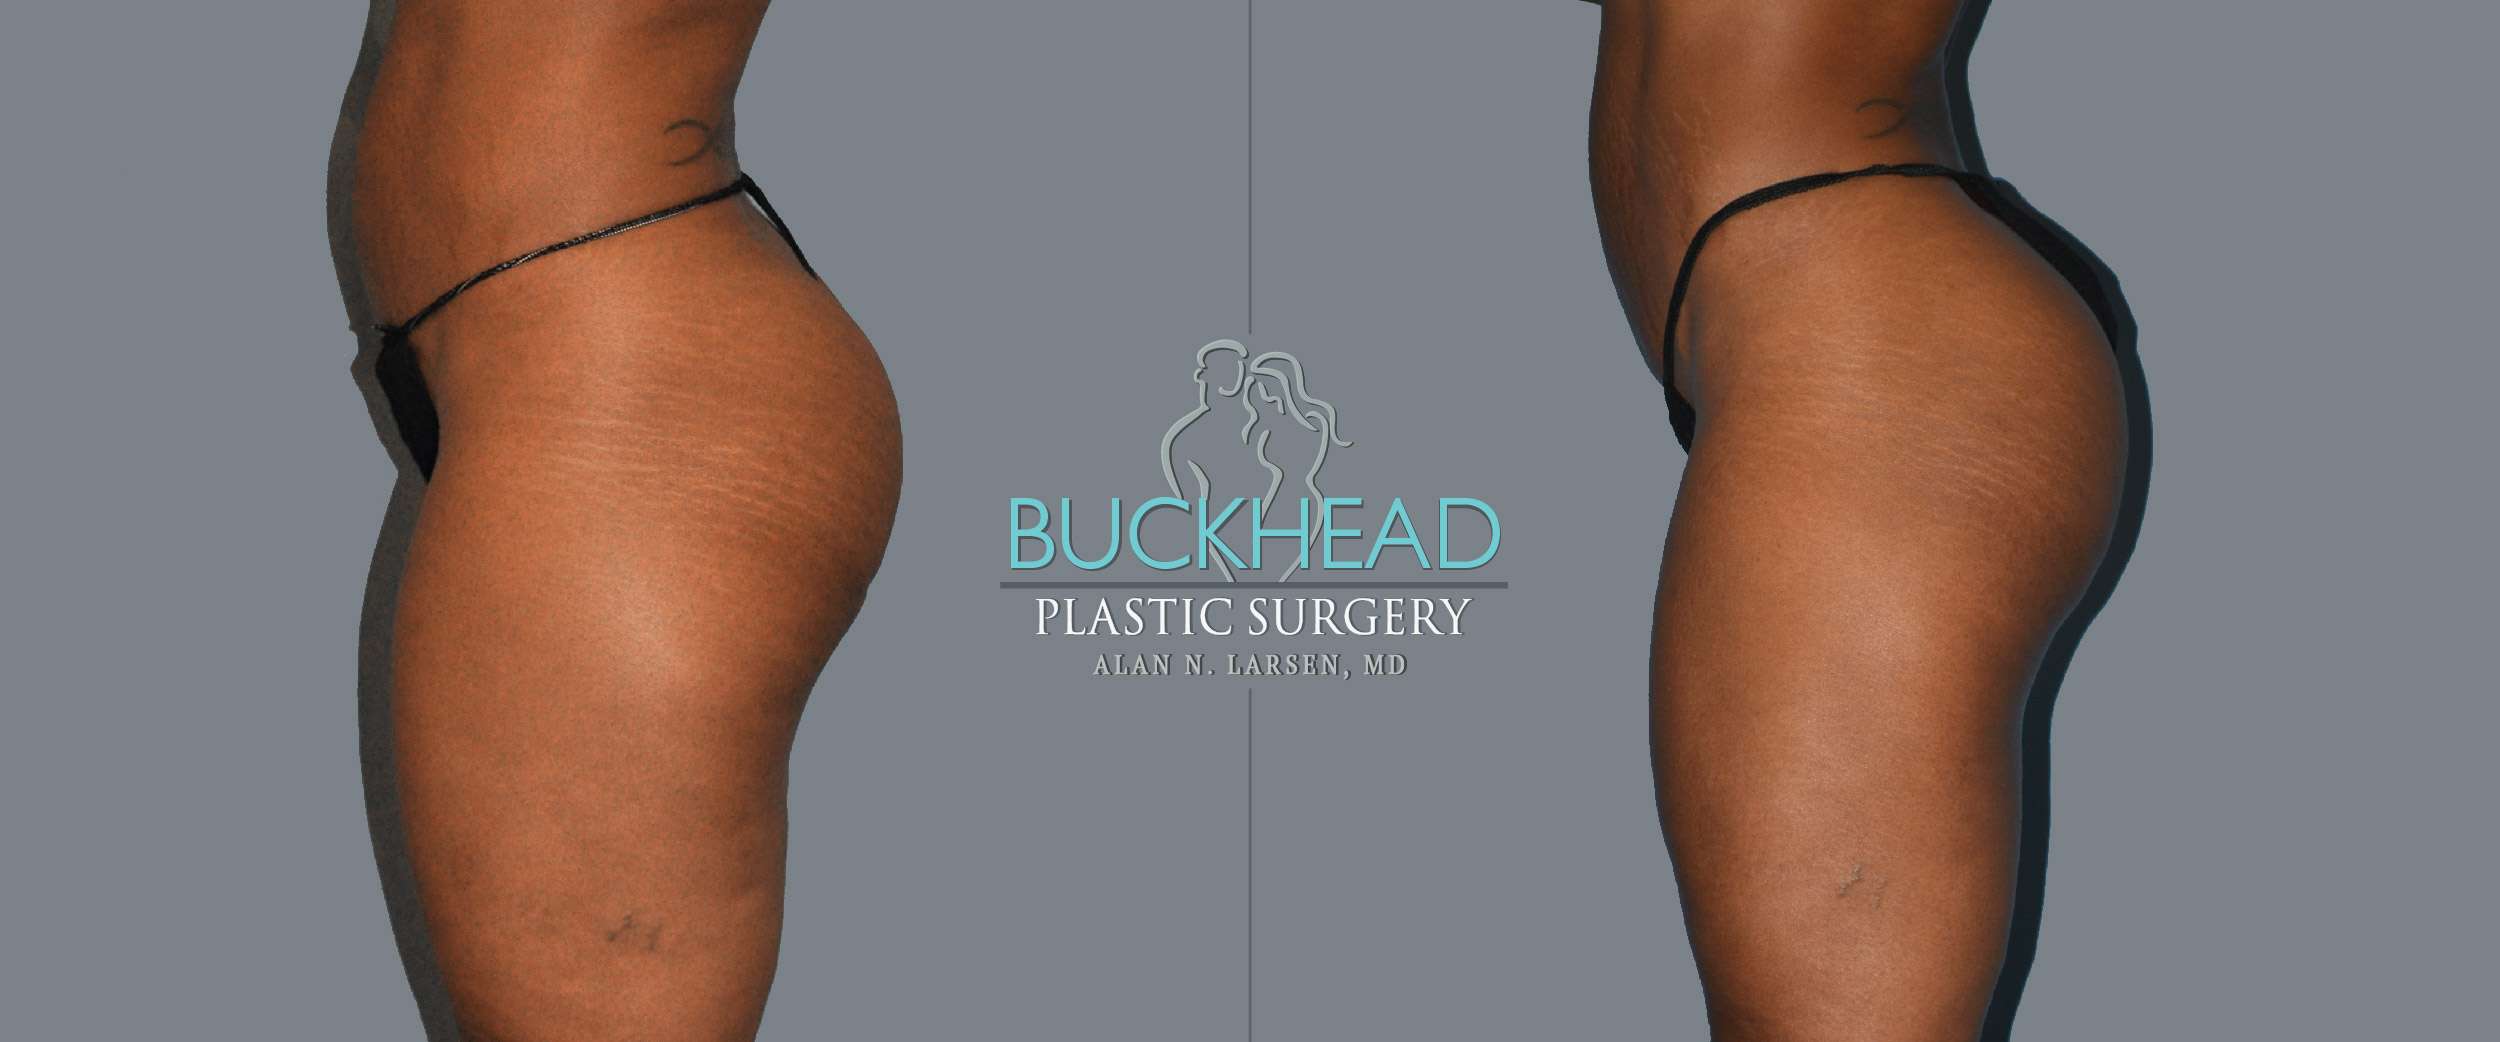 Before and After Photo Gallery | Liposuction - Thigh Front | Buckhead Plastic Surgery | Alan N. Larsen, MD | Double Board-Certified Plastic Surgeon | Atlanta GA